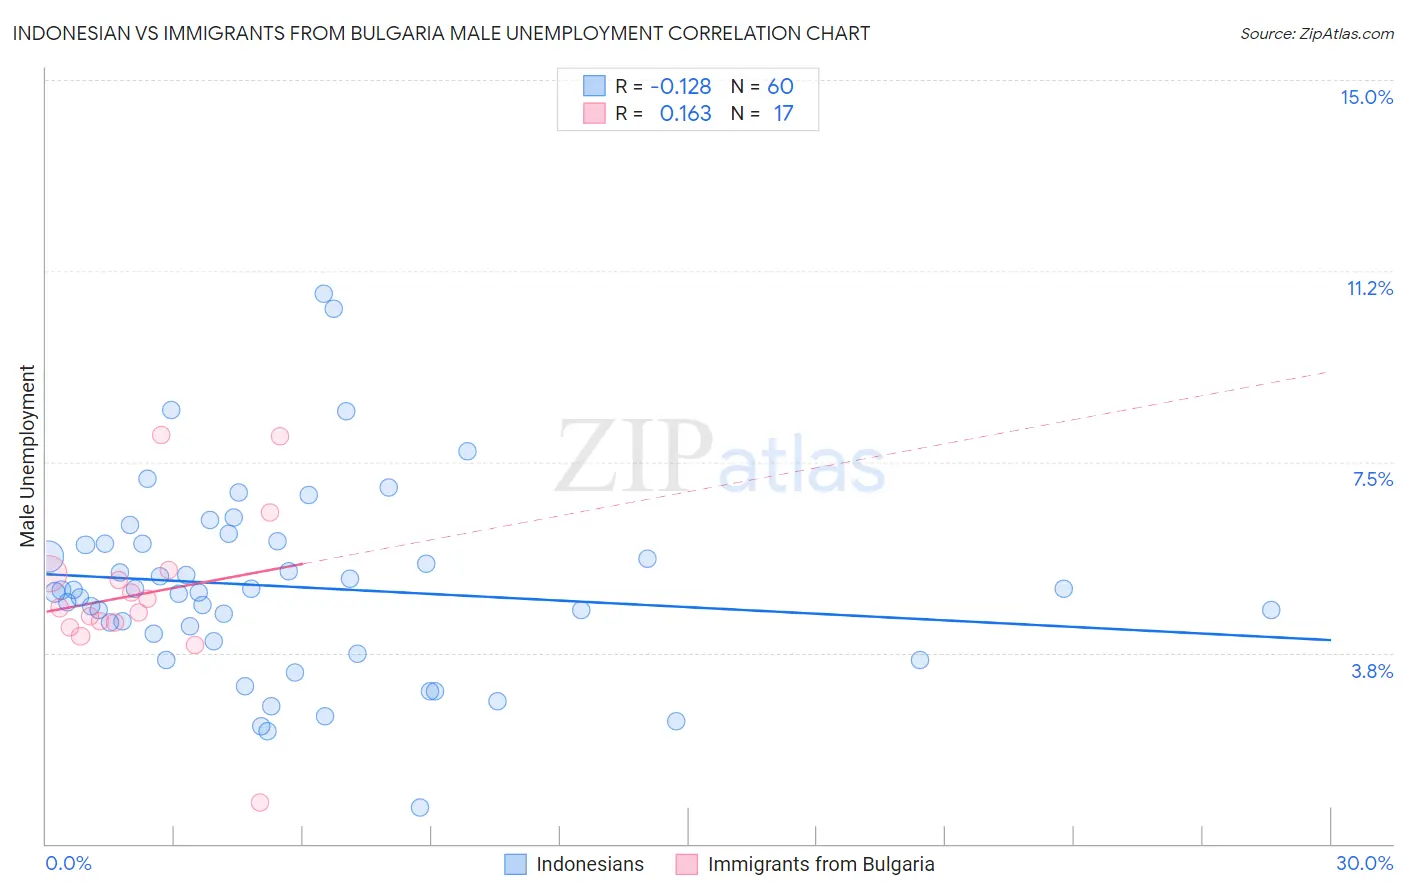 Indonesian vs Immigrants from Bulgaria Male Unemployment